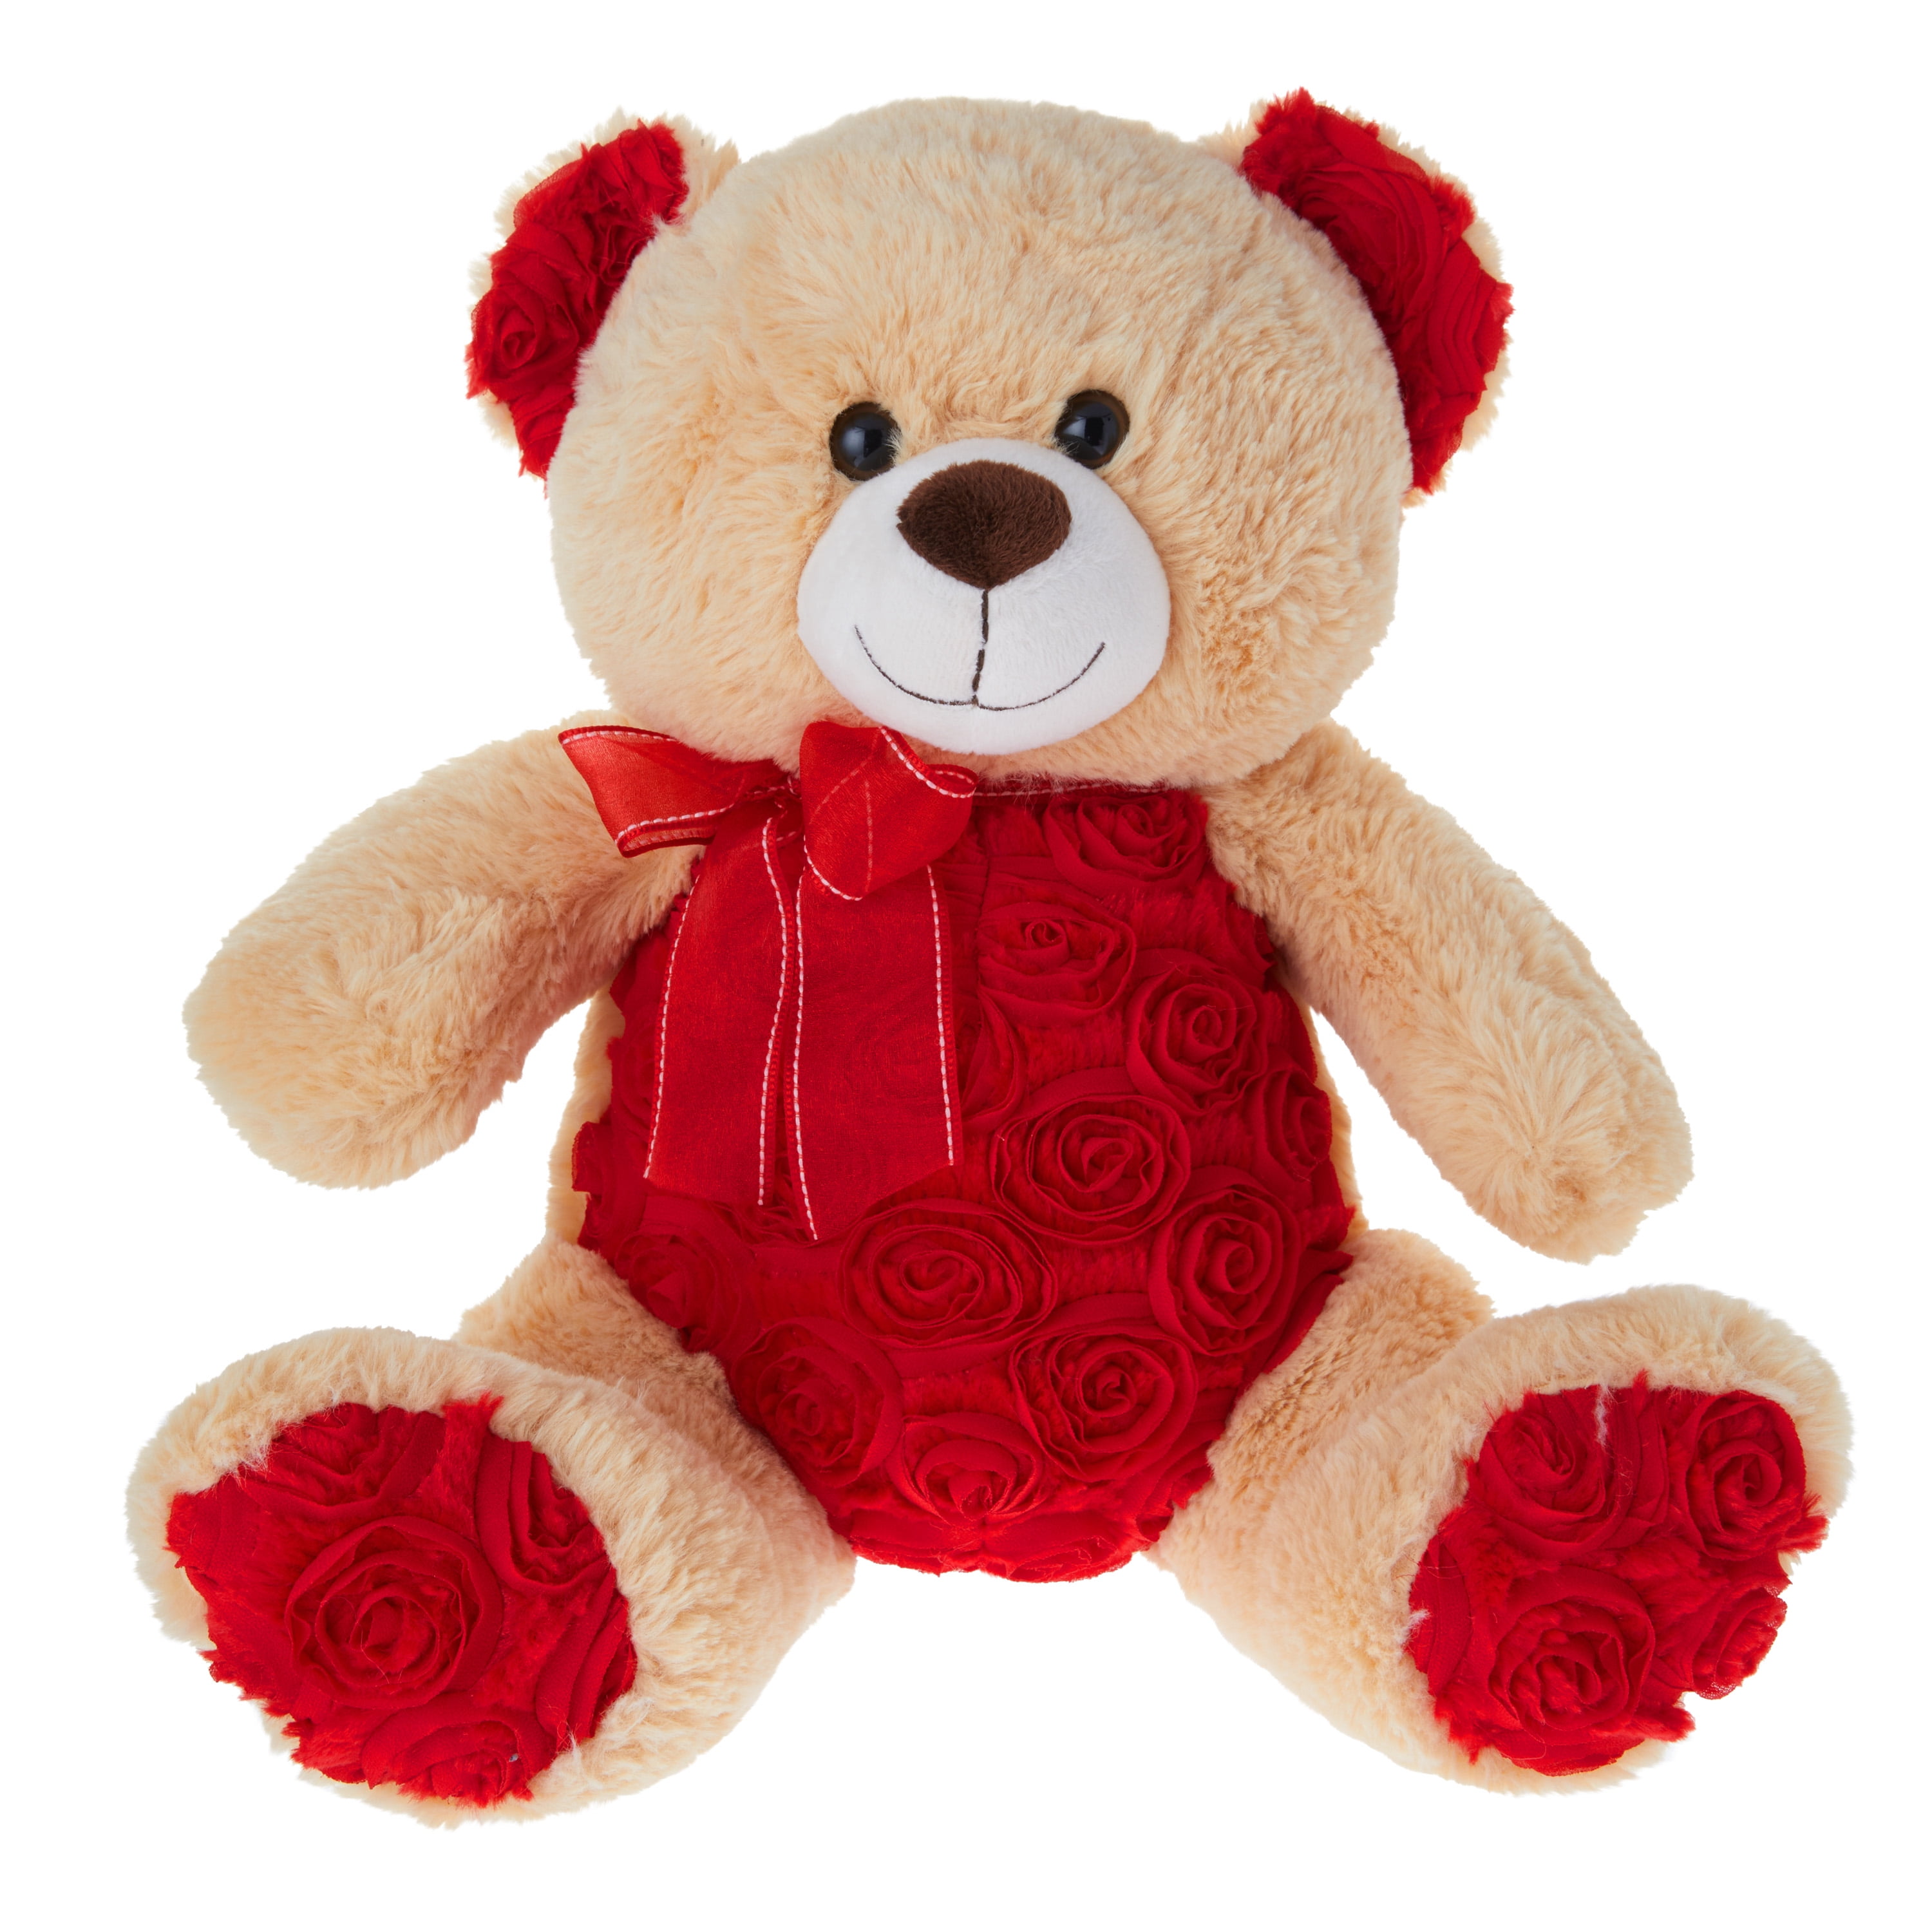 VALENTINES DAY GIFT For Her Him Present Plush Teddy Balloon Red Rose Soaps 